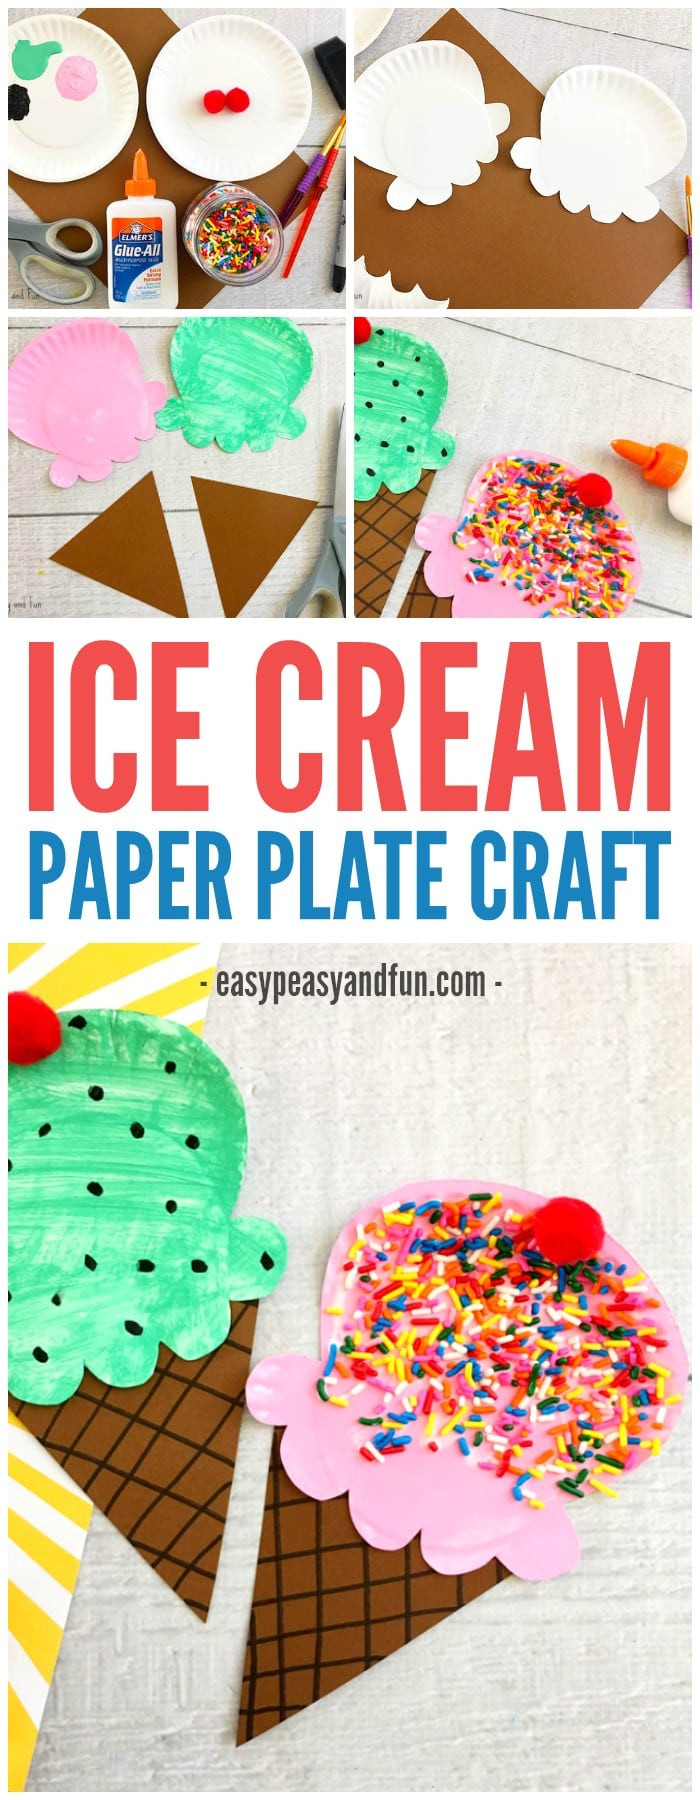 Fun Craft For Toddlers
 Paper Plate Ice Cream Craft Summer Craft Idea for Kids